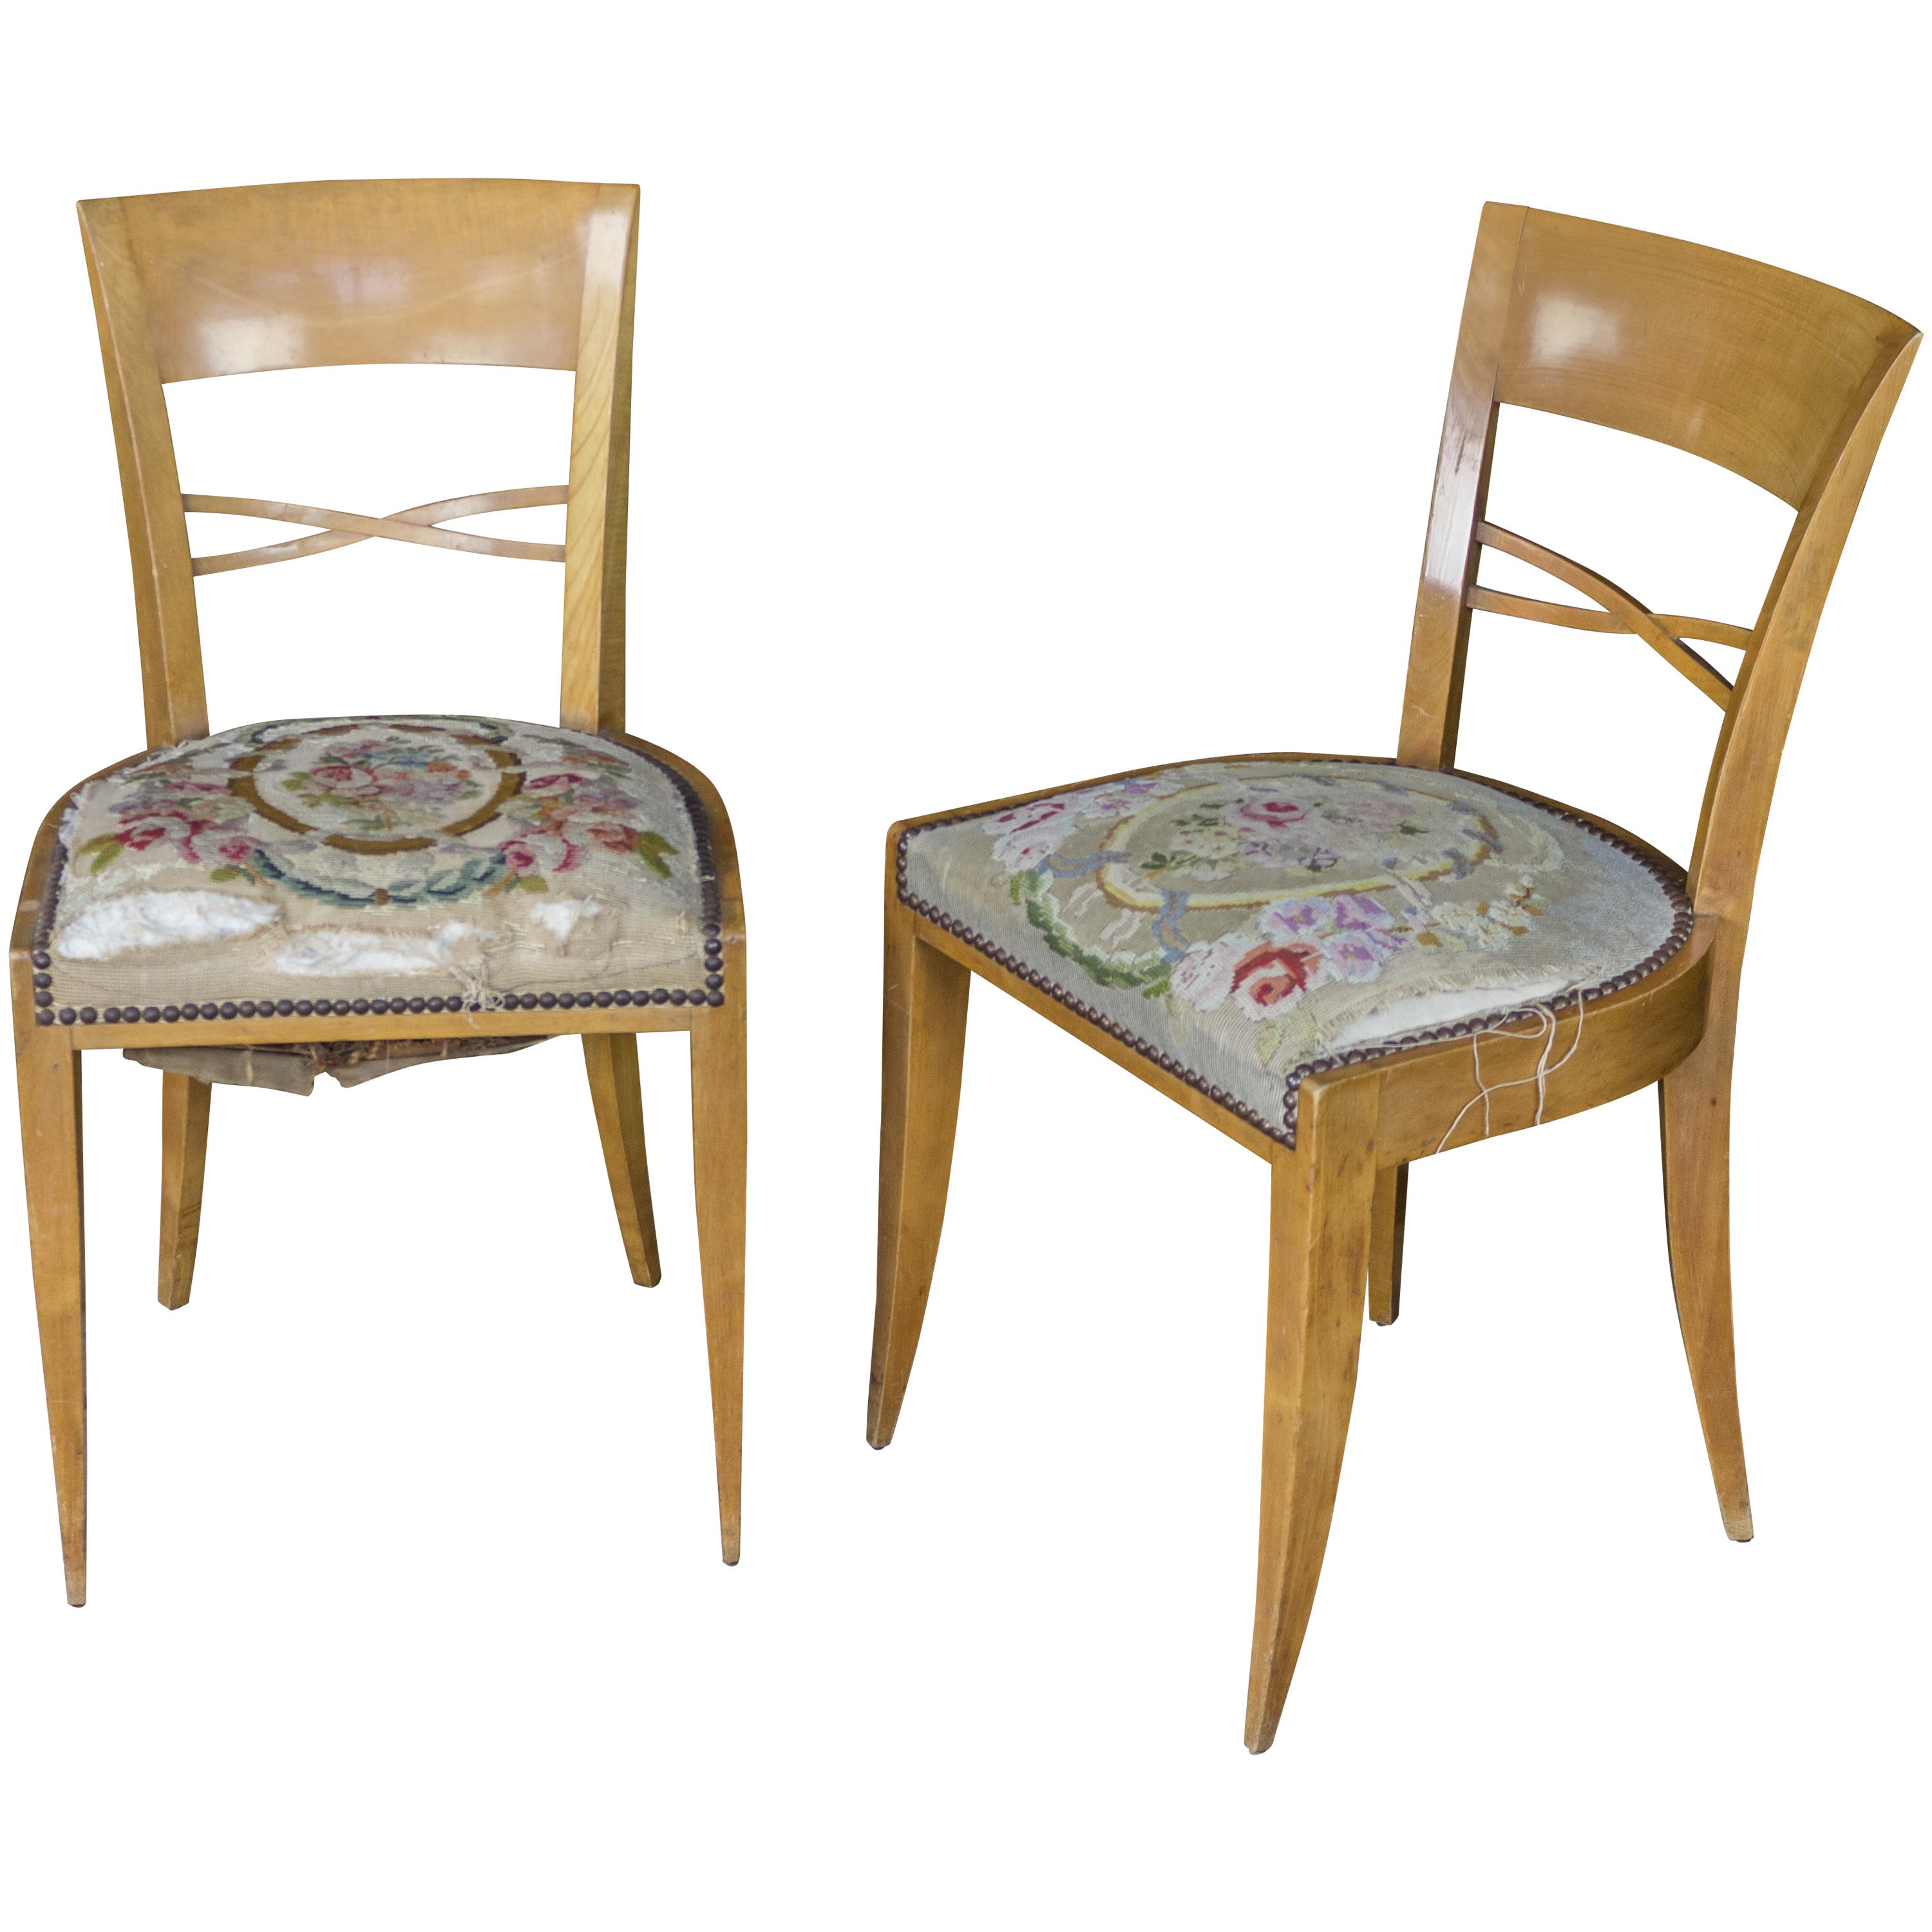 Pair of French Side Chairs with Embroidered Seats For Sale